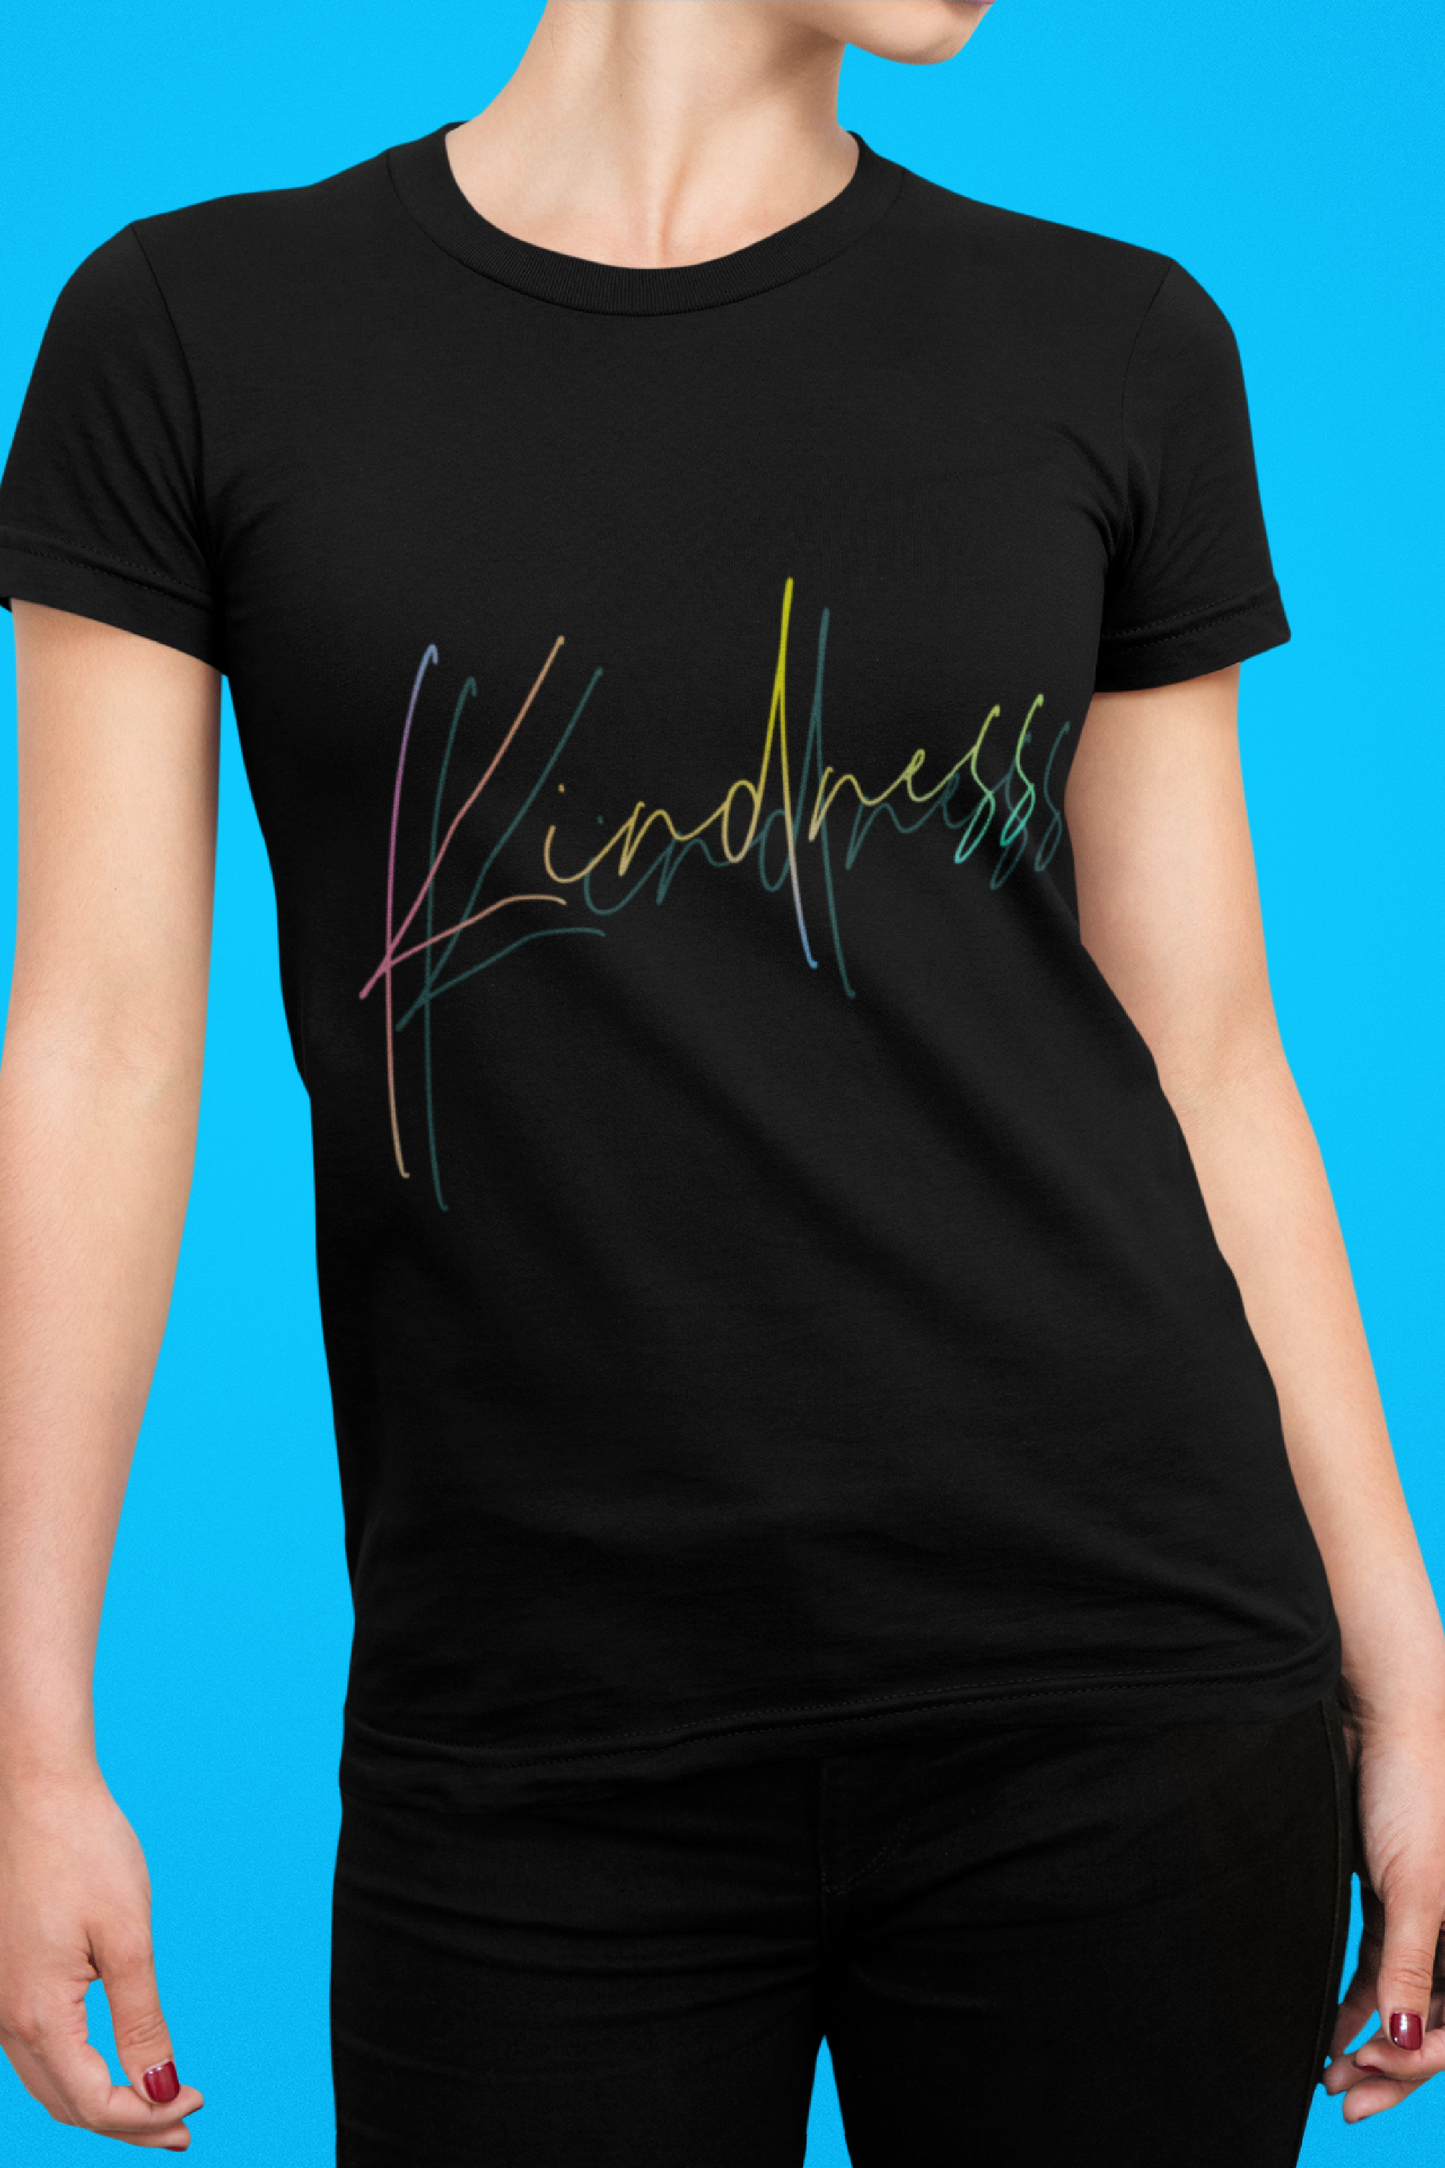 Kindness Tshirt, Kindness Inspirational Shirt, Positive Quote Tee For Women, Tshirt That Warm The Heart